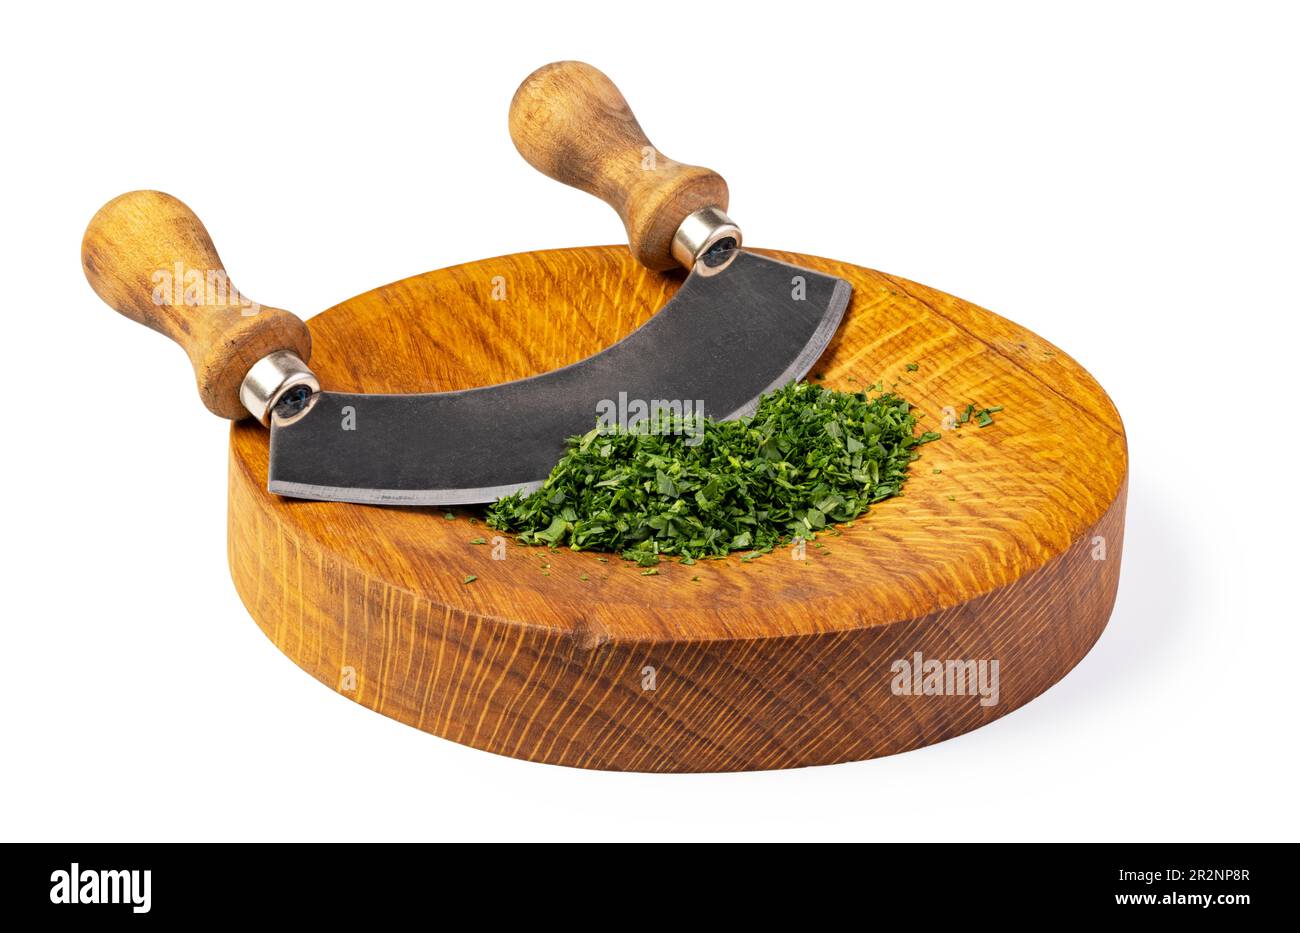 https://c8.alamy.com/comp/2R2NP8R/parsley-on-a-chopping-board-in-the-kitchen-2R2NP8R.jpg